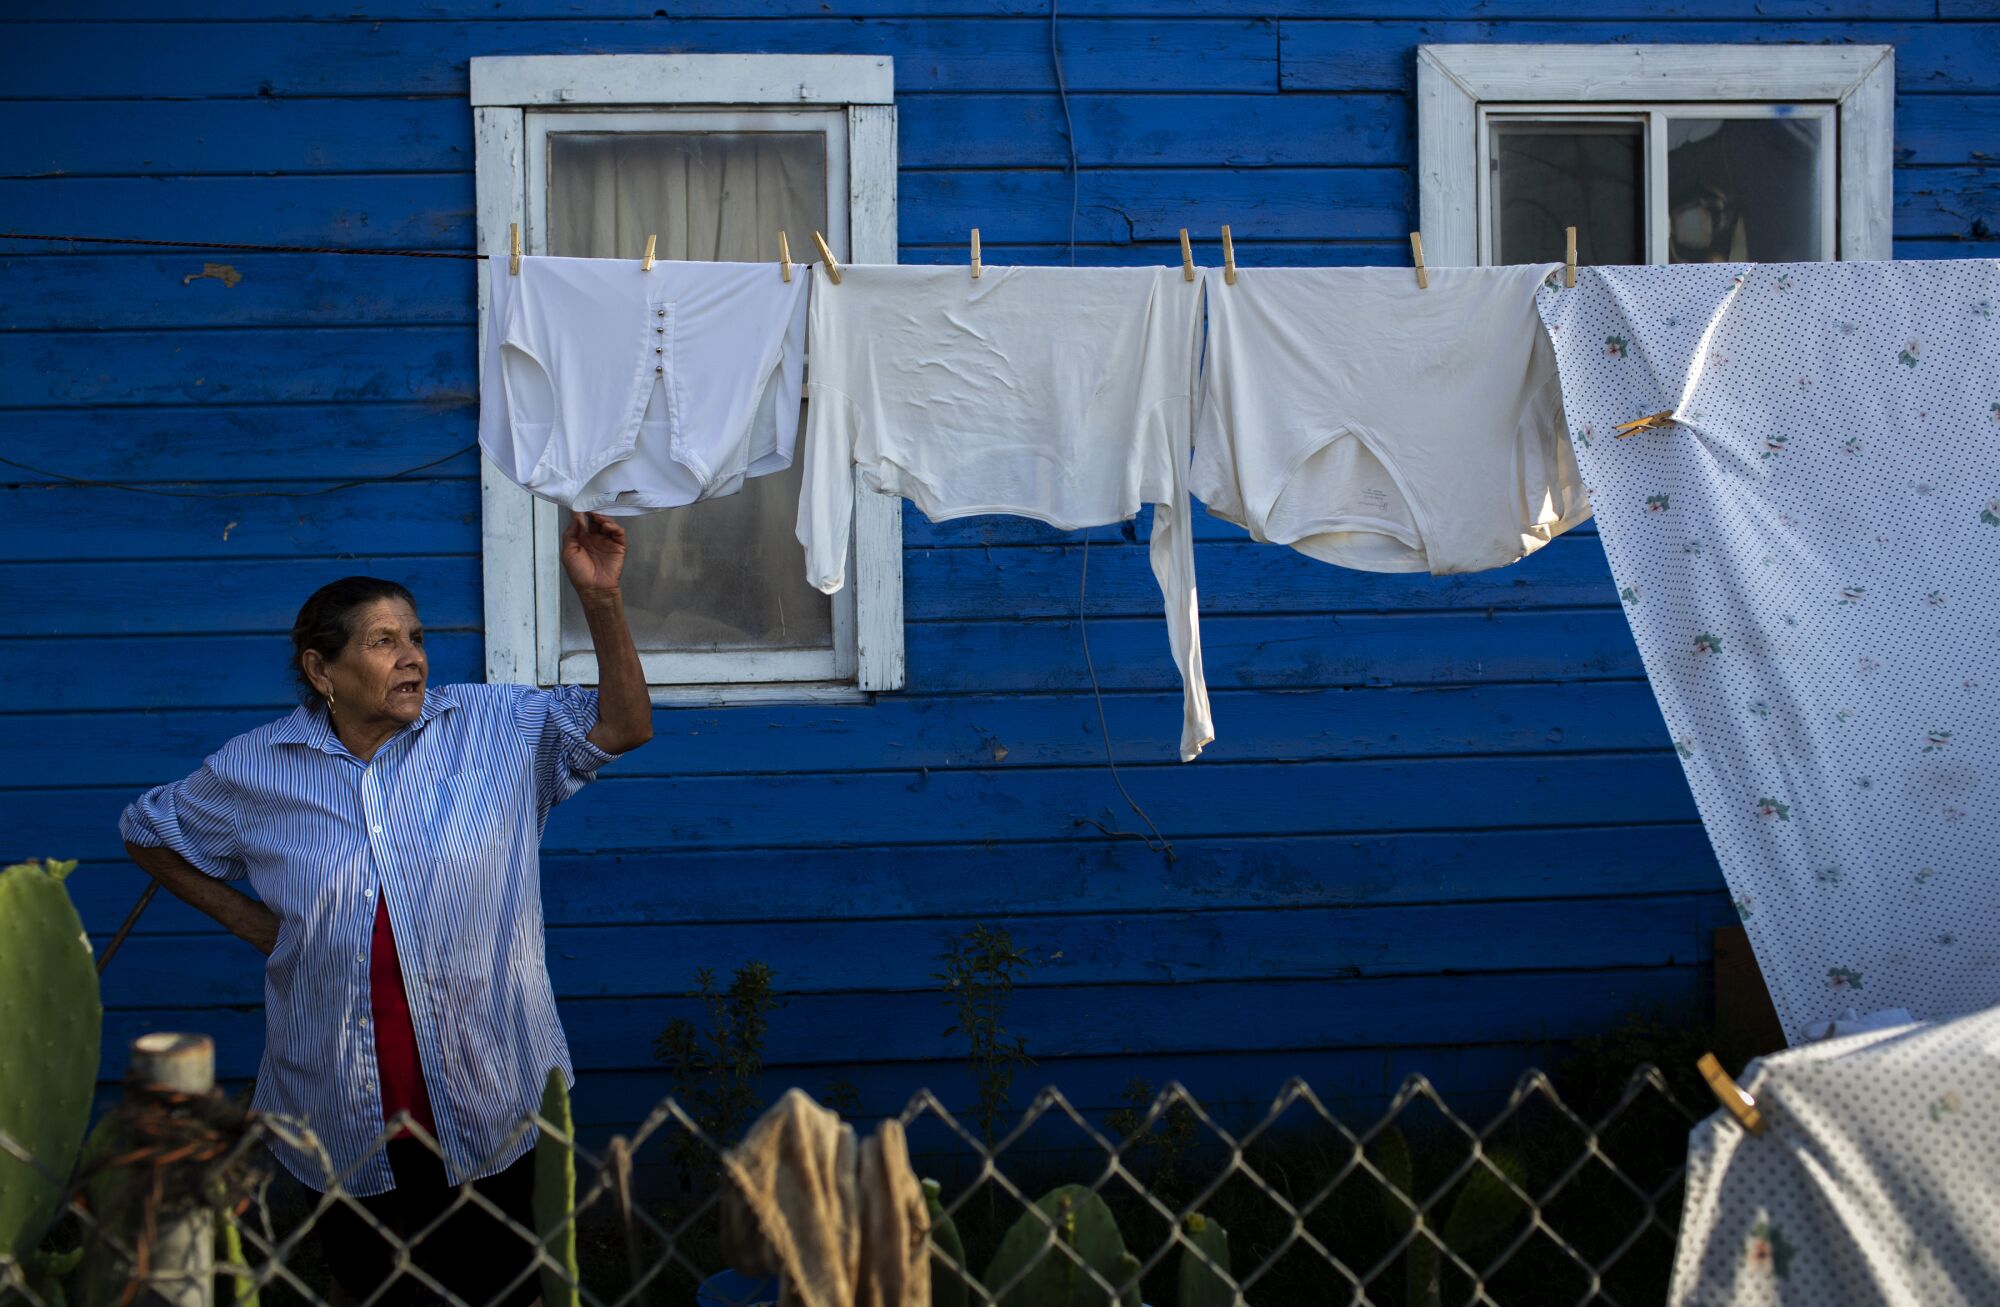 Estella Lopez waits as clothes dry on a line at her home in Stratford.